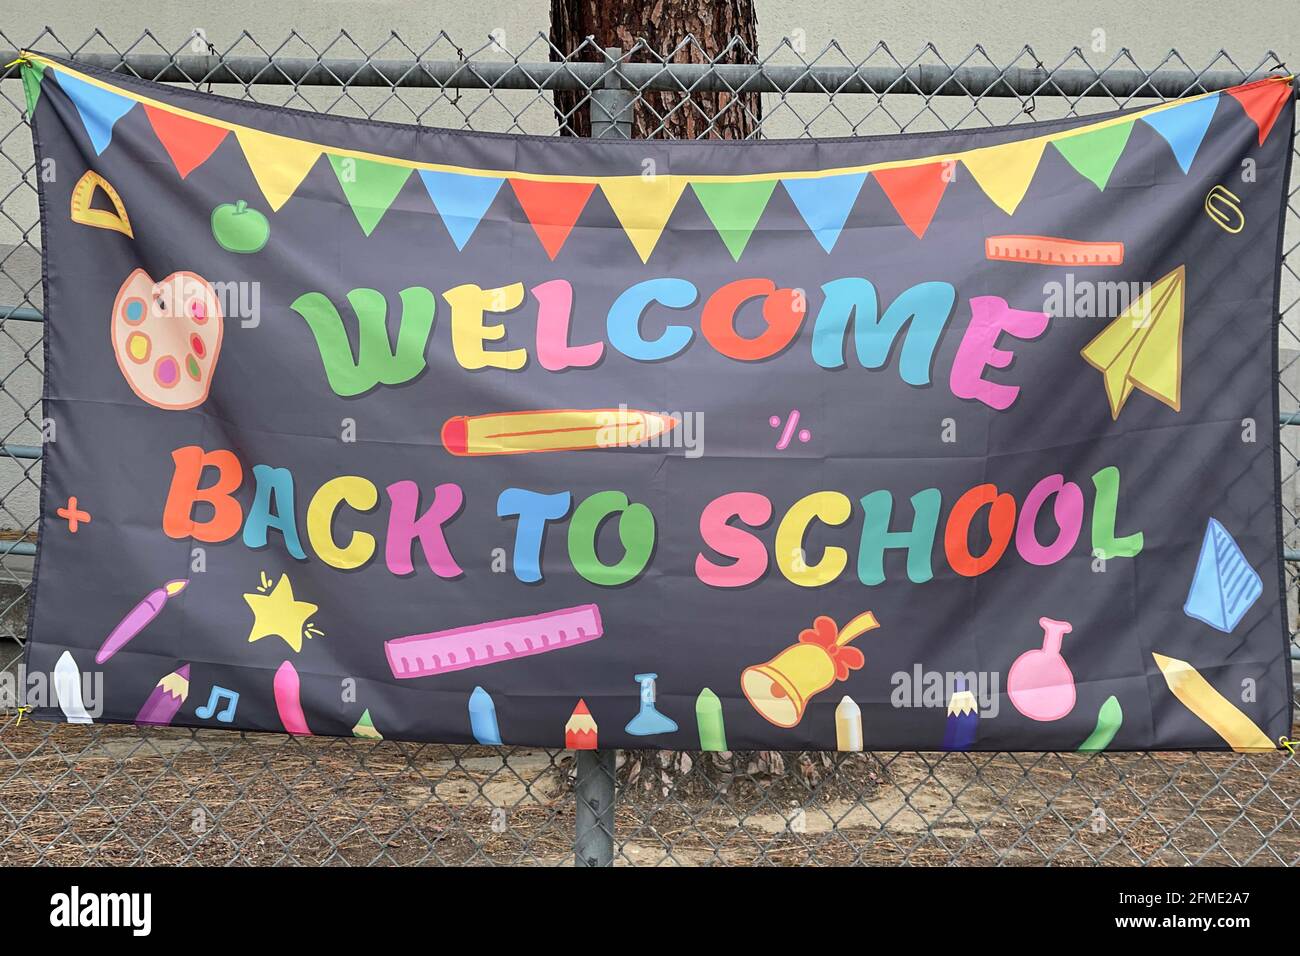 A Welcome Back sign at Ynez Elementary School, Saturday, May 8, 2021, in Monterey Park, Calif. Stock Photo